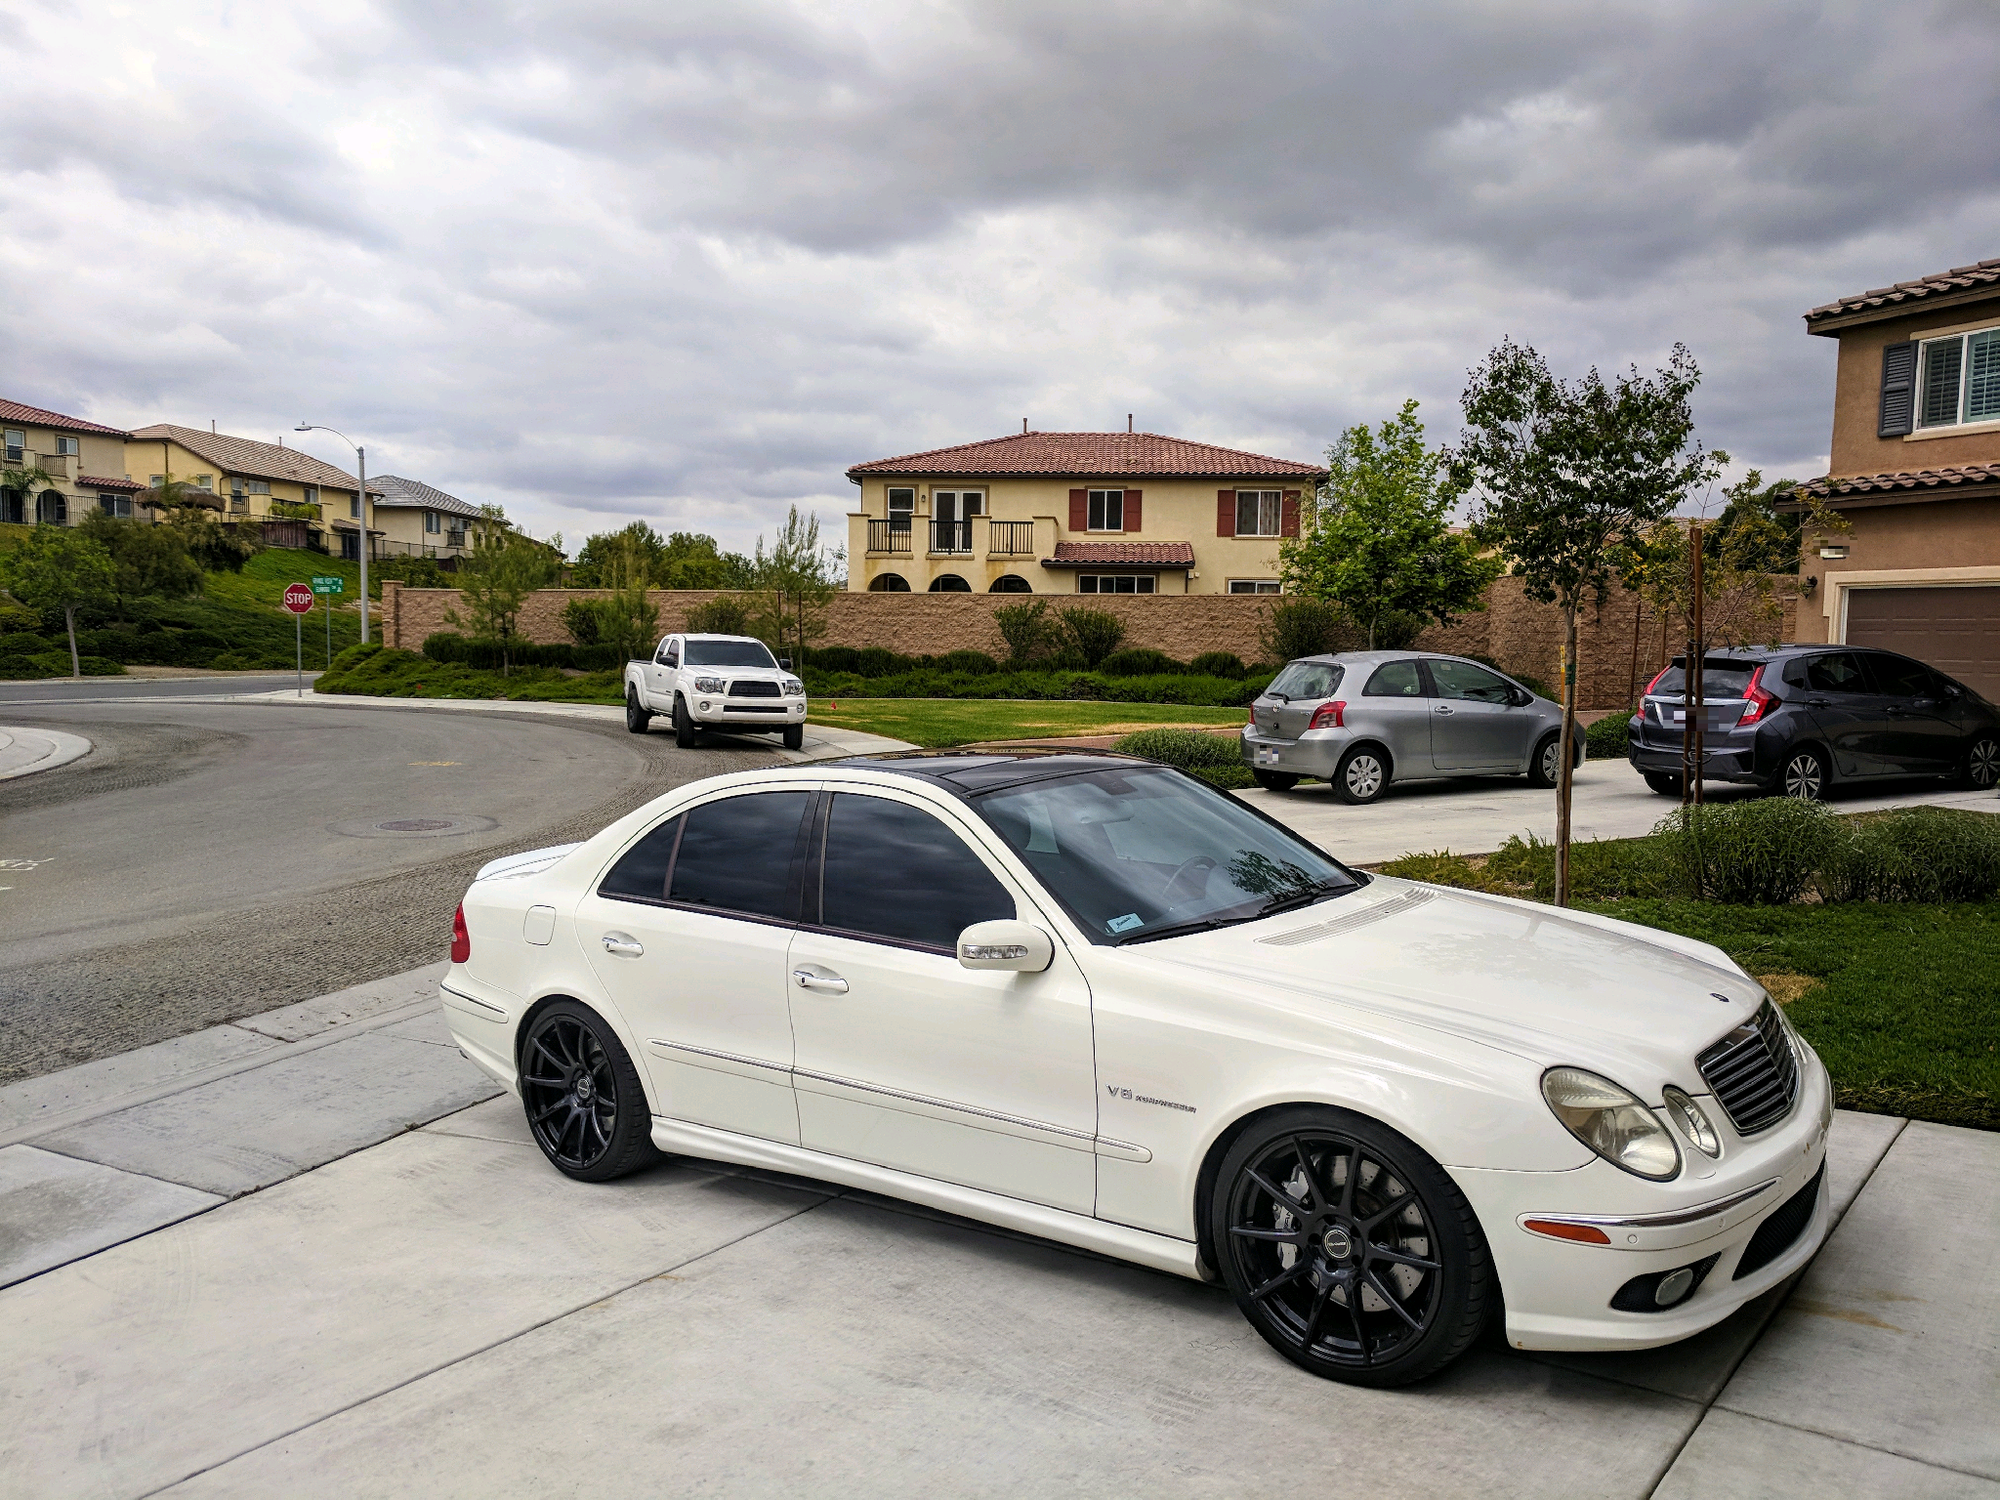 2005 Mercedes-Benz E55 AMG - 2005 Mercedes Benz E55 AMG - Used - VIN WDBUF76J45A758321 - 173,000 Miles - 8 cyl - 2WD - Automatic - Sedan - White - Riverside, CA 92503, United States